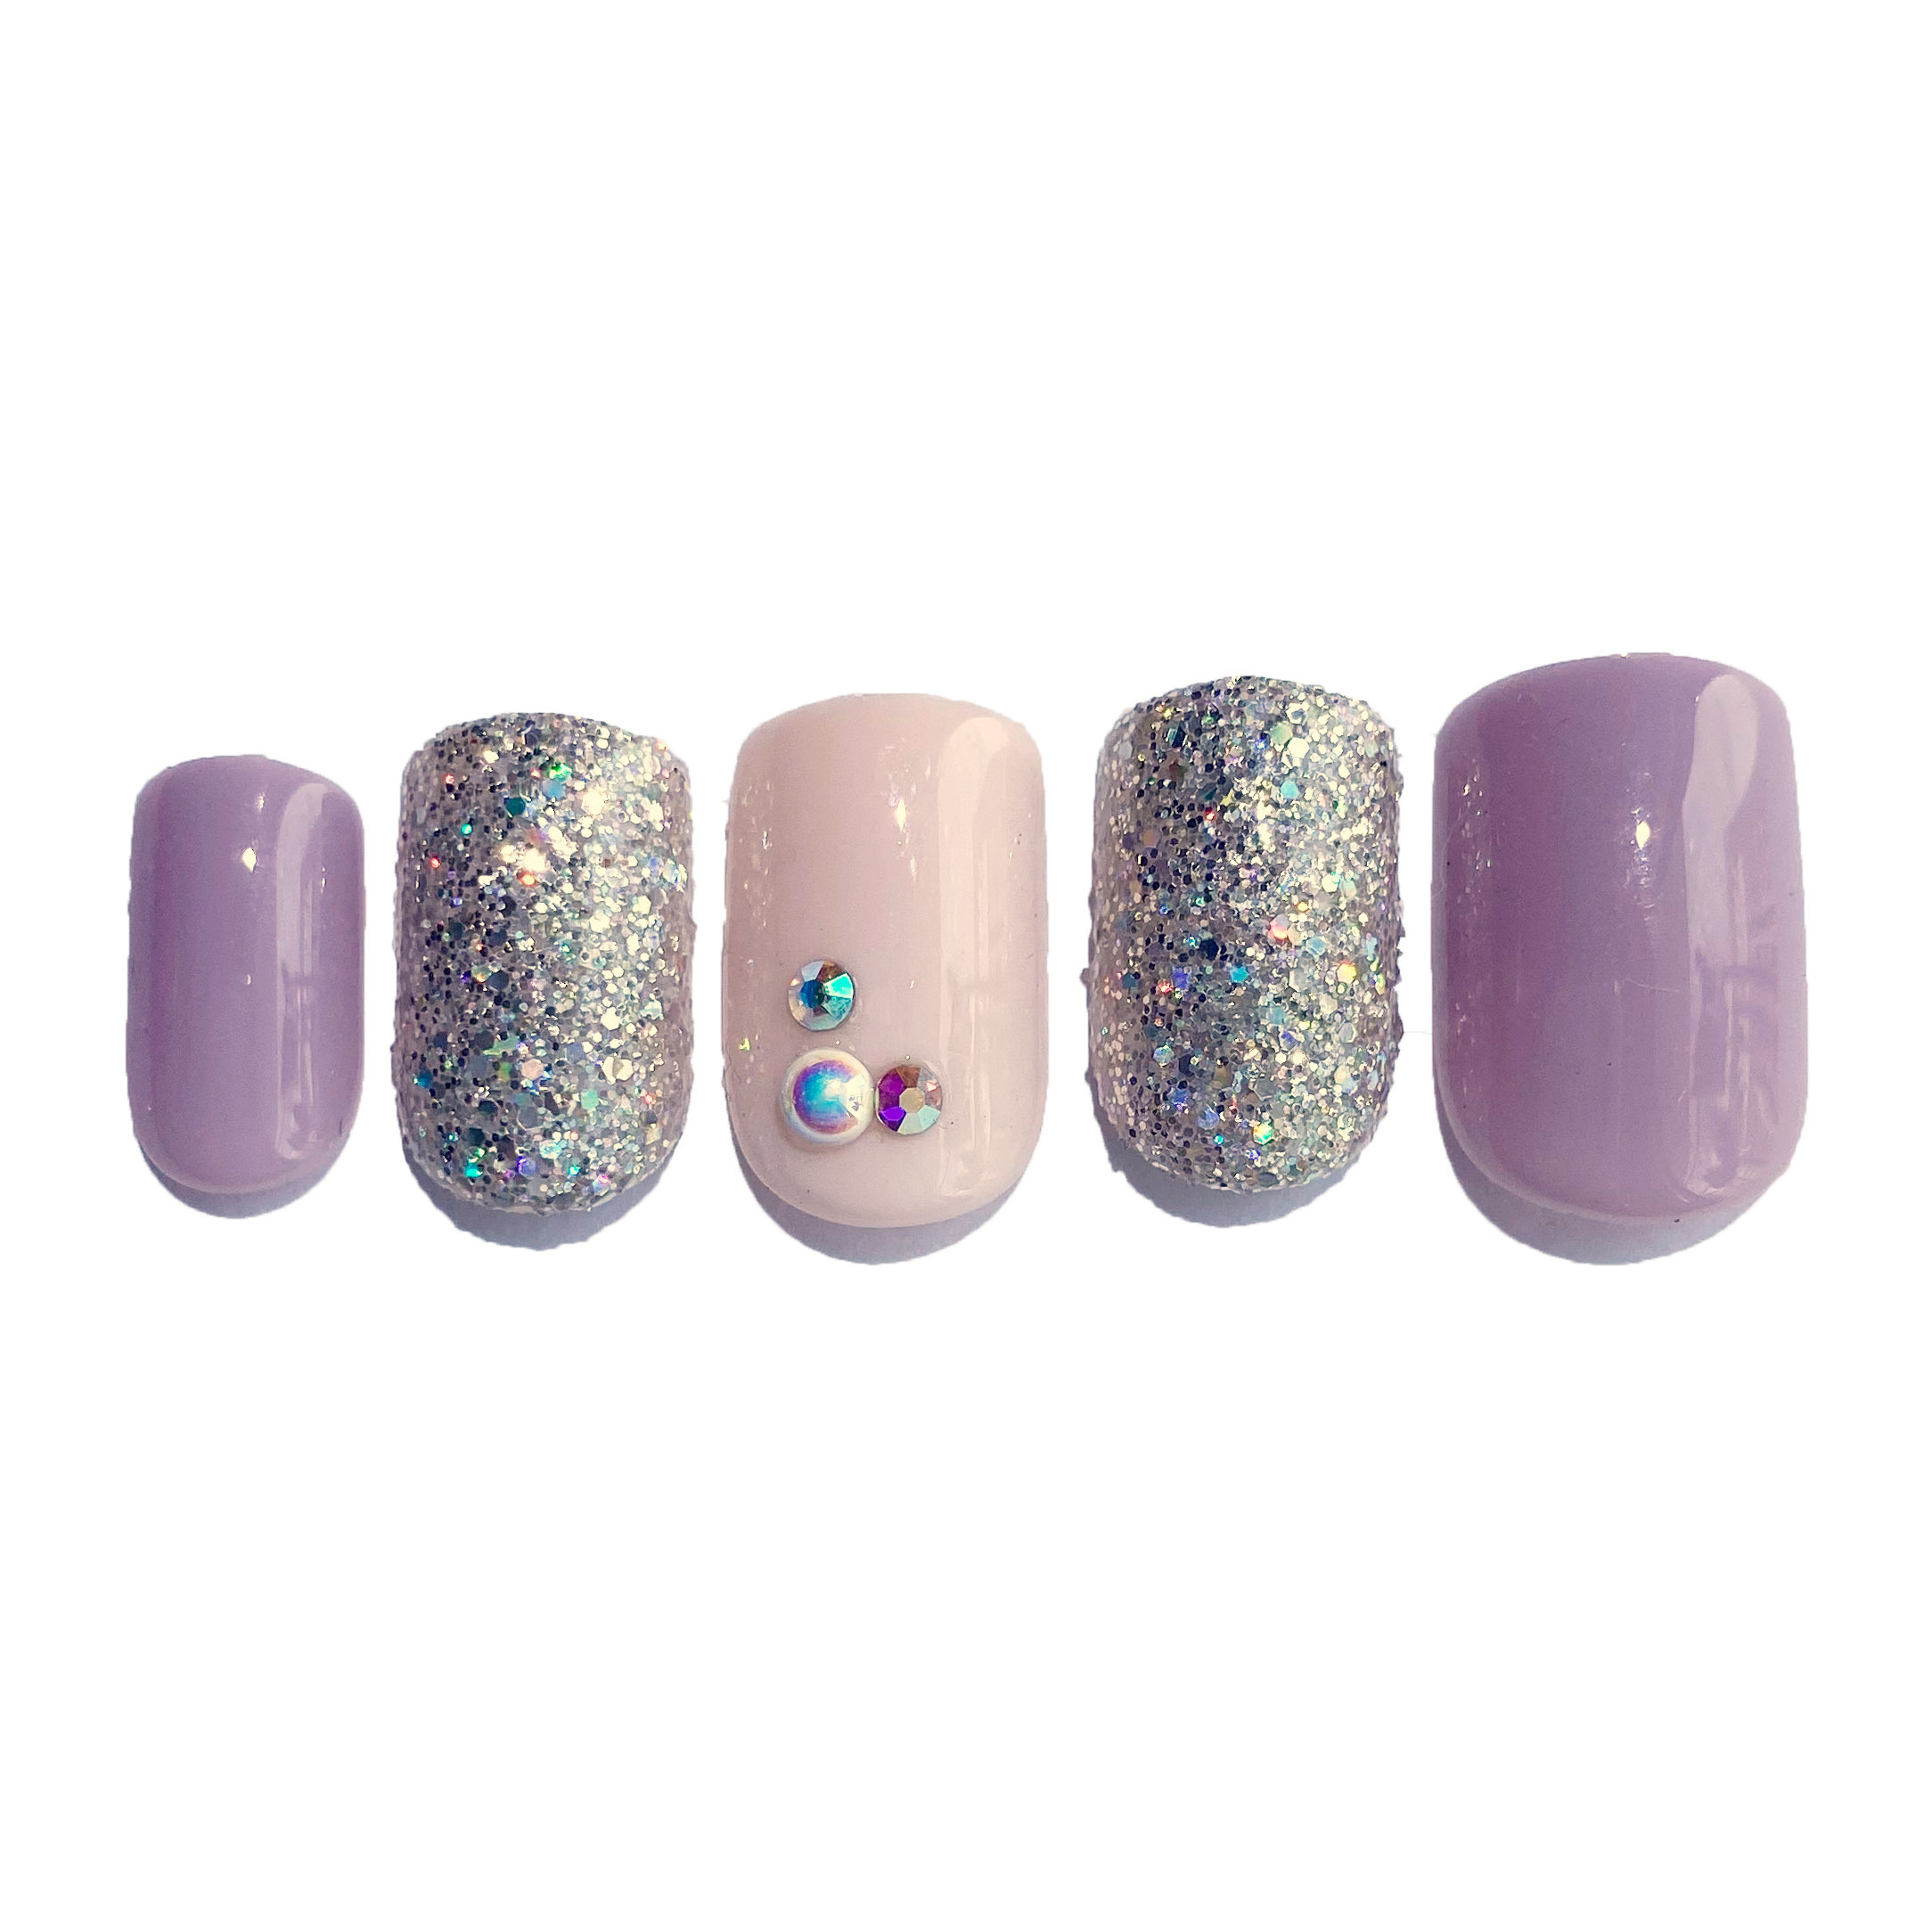 P-005 If This Is Love - Glitter Press-on Manicure.jpg